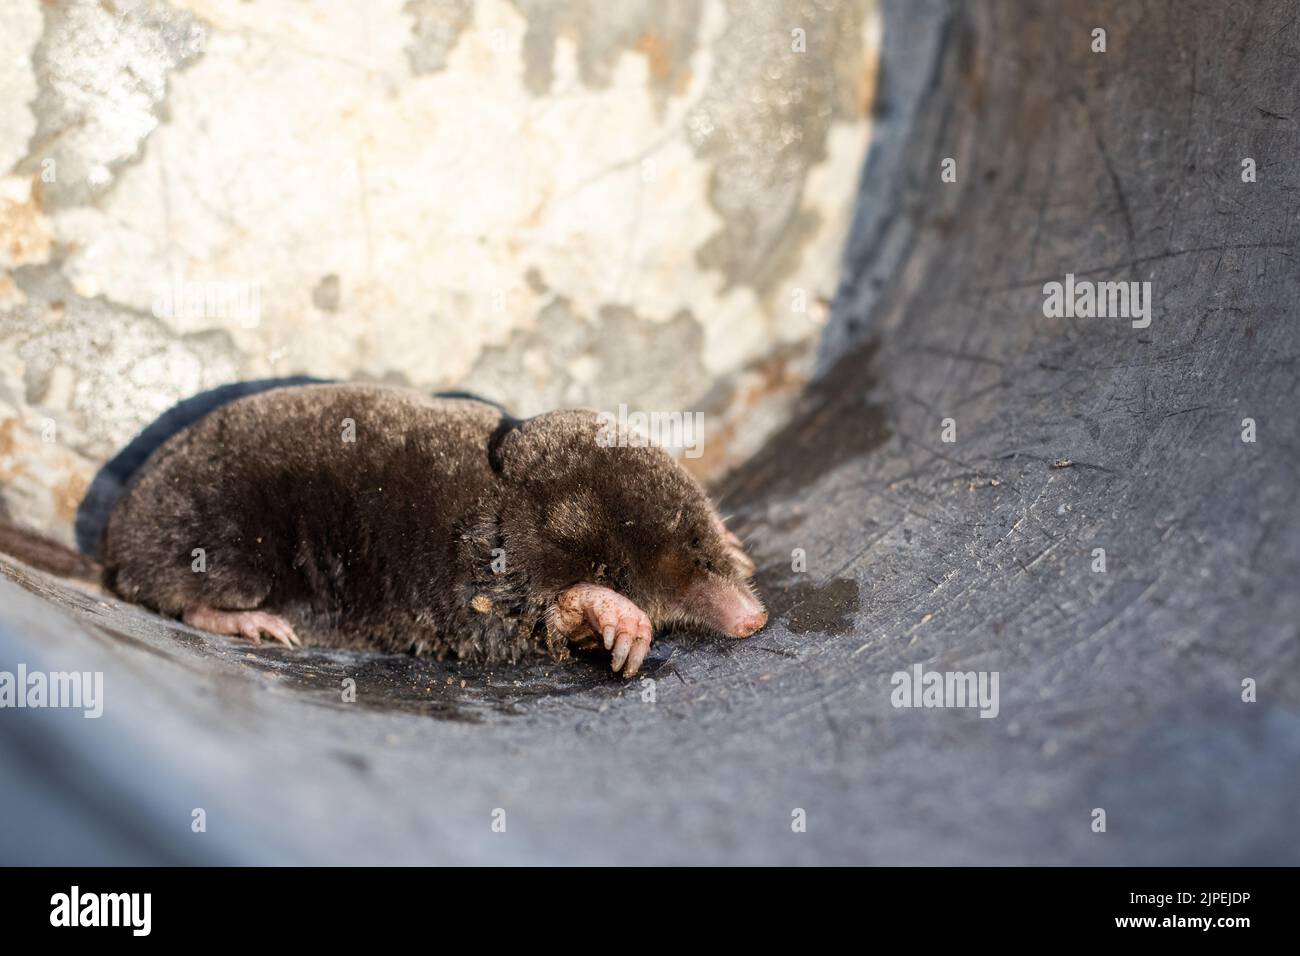 earth mole, an animal pest caught in a bucket. Pest control in the garden. Stock Photo